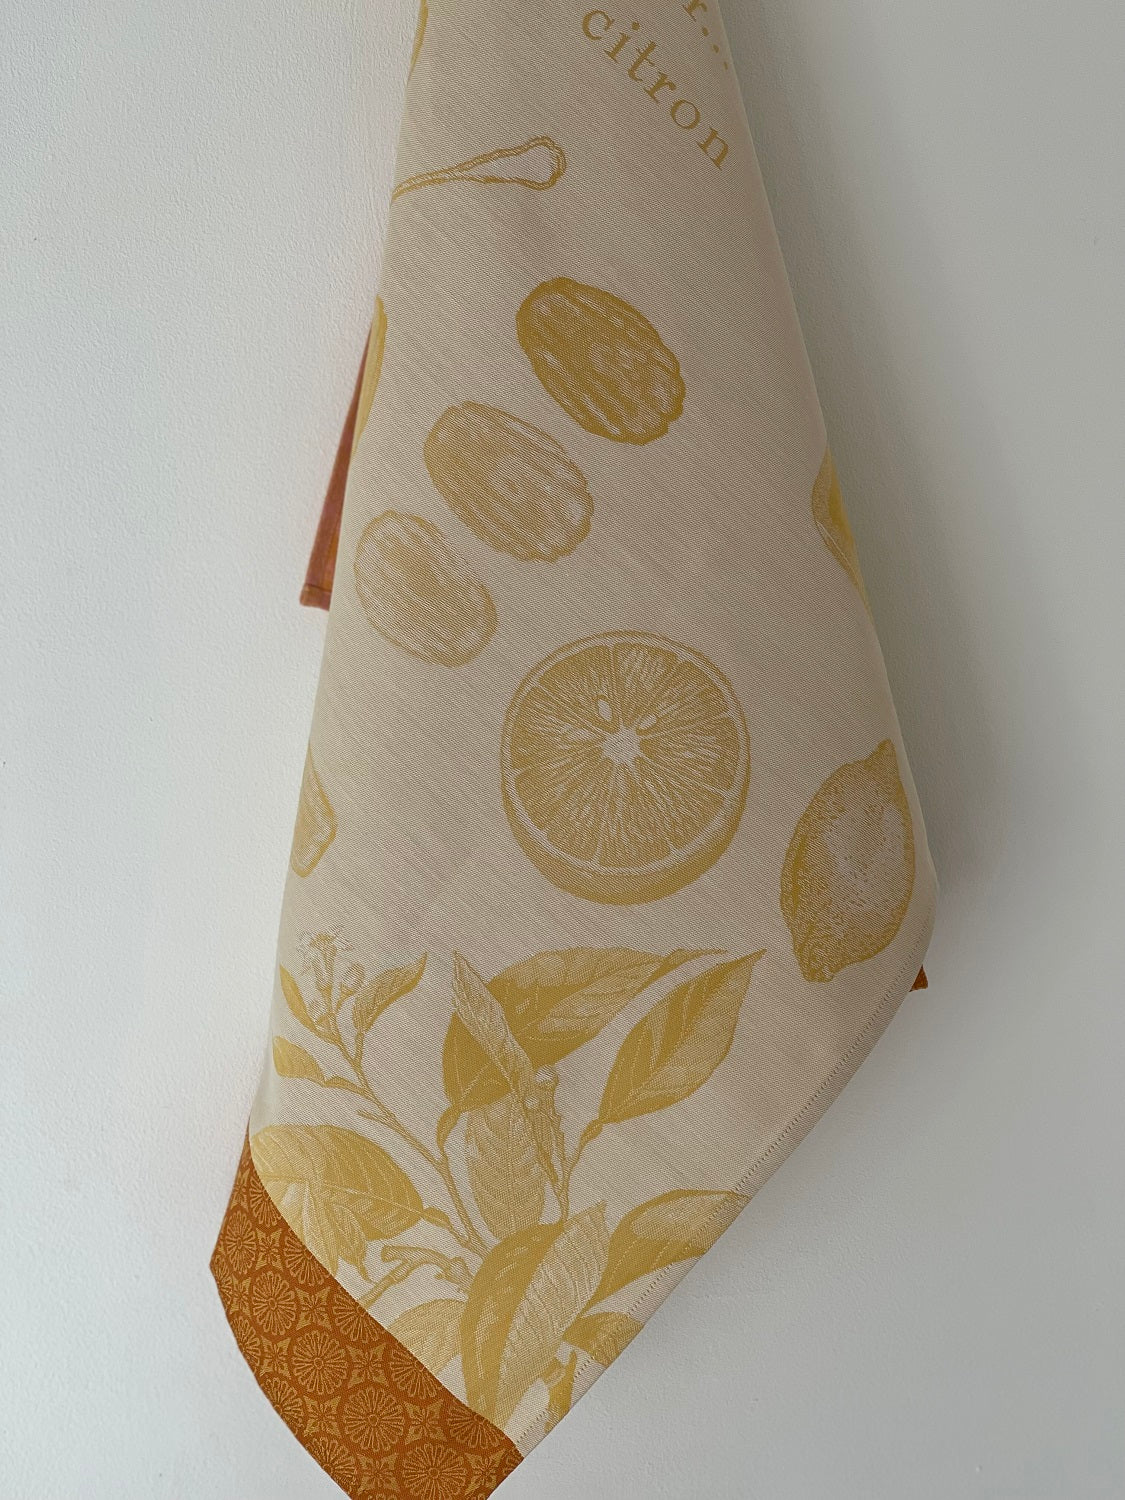 Jacquard Francais "Madeleines" (Butter), Woven cotton tea towel. Made in France.